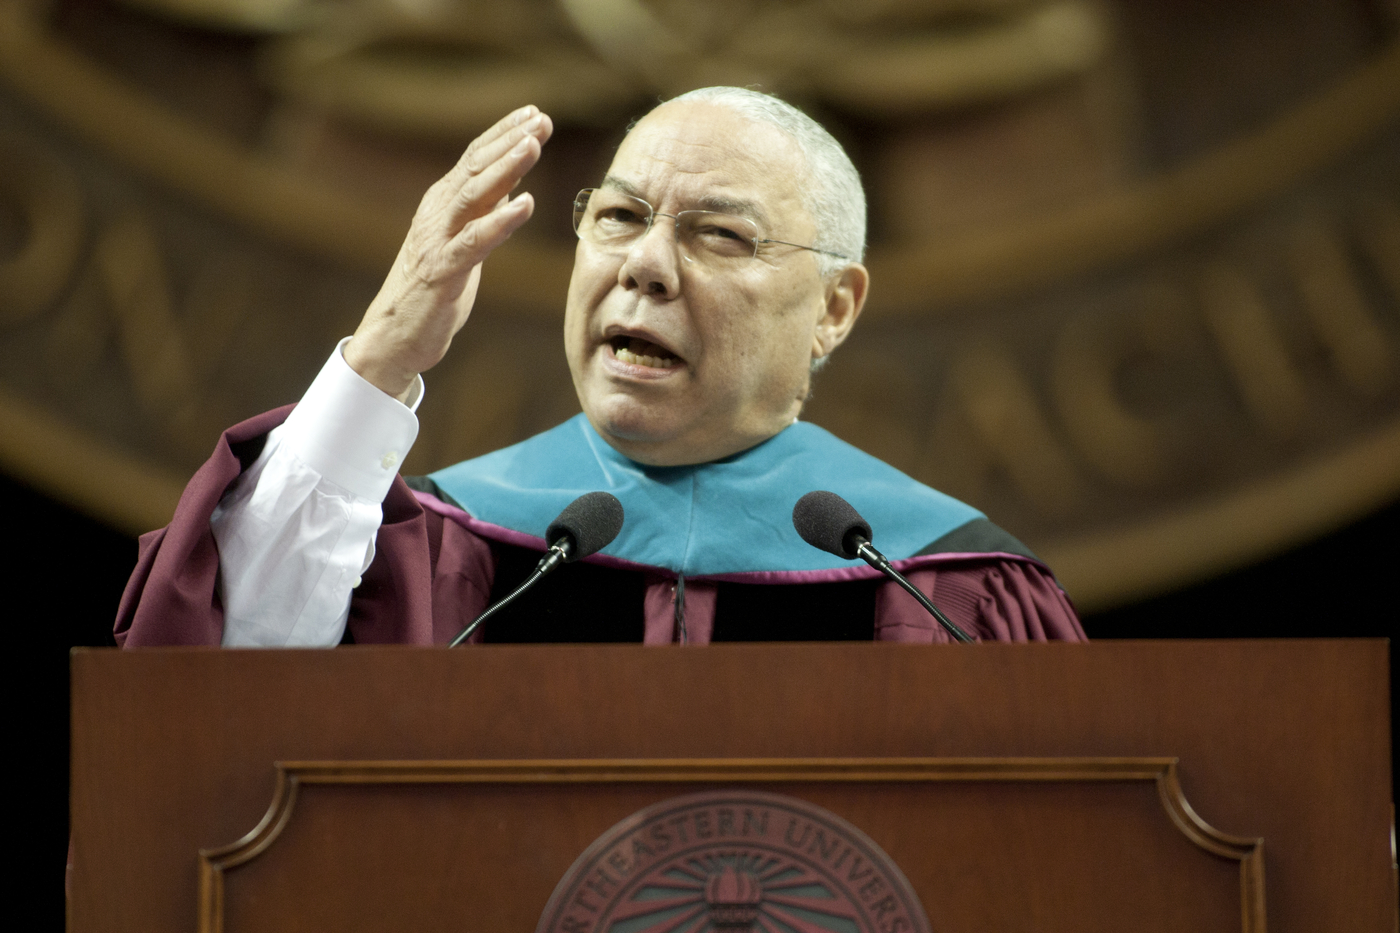 Colin Powell in Commencement regalia, speaking at the podium